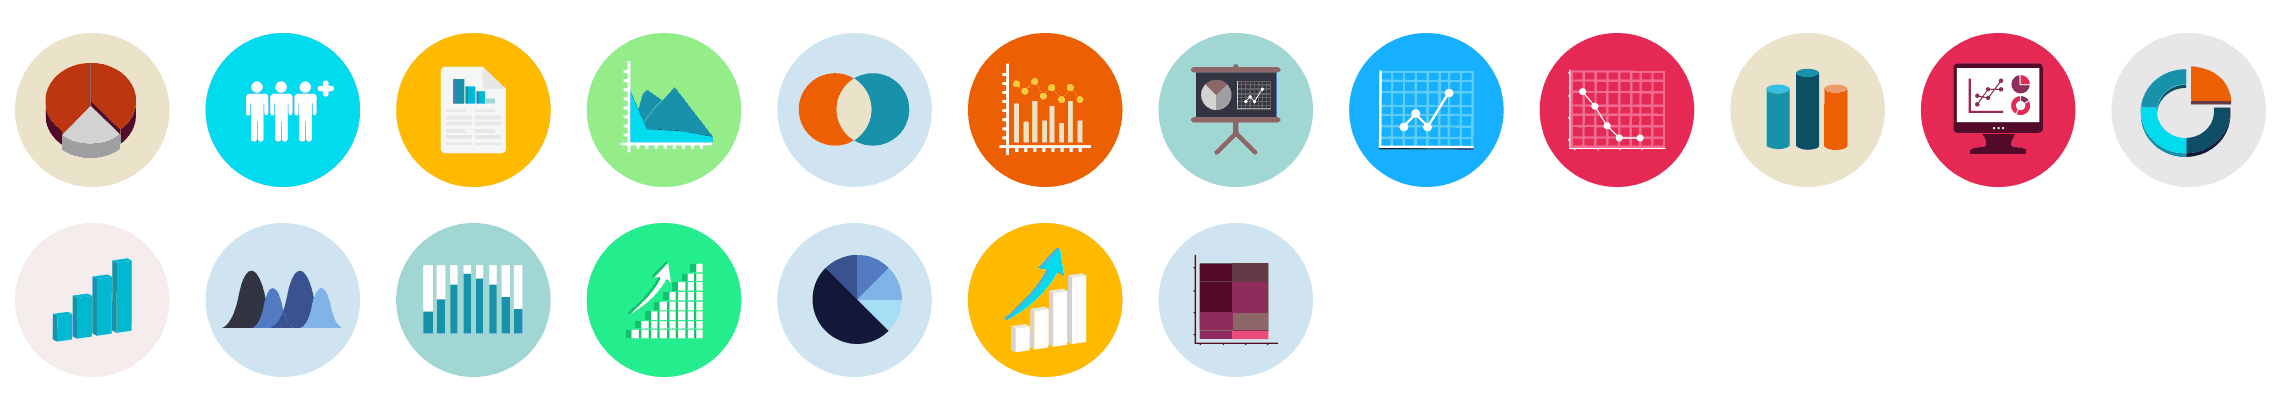 charts-flat-icons-vol-1-preview